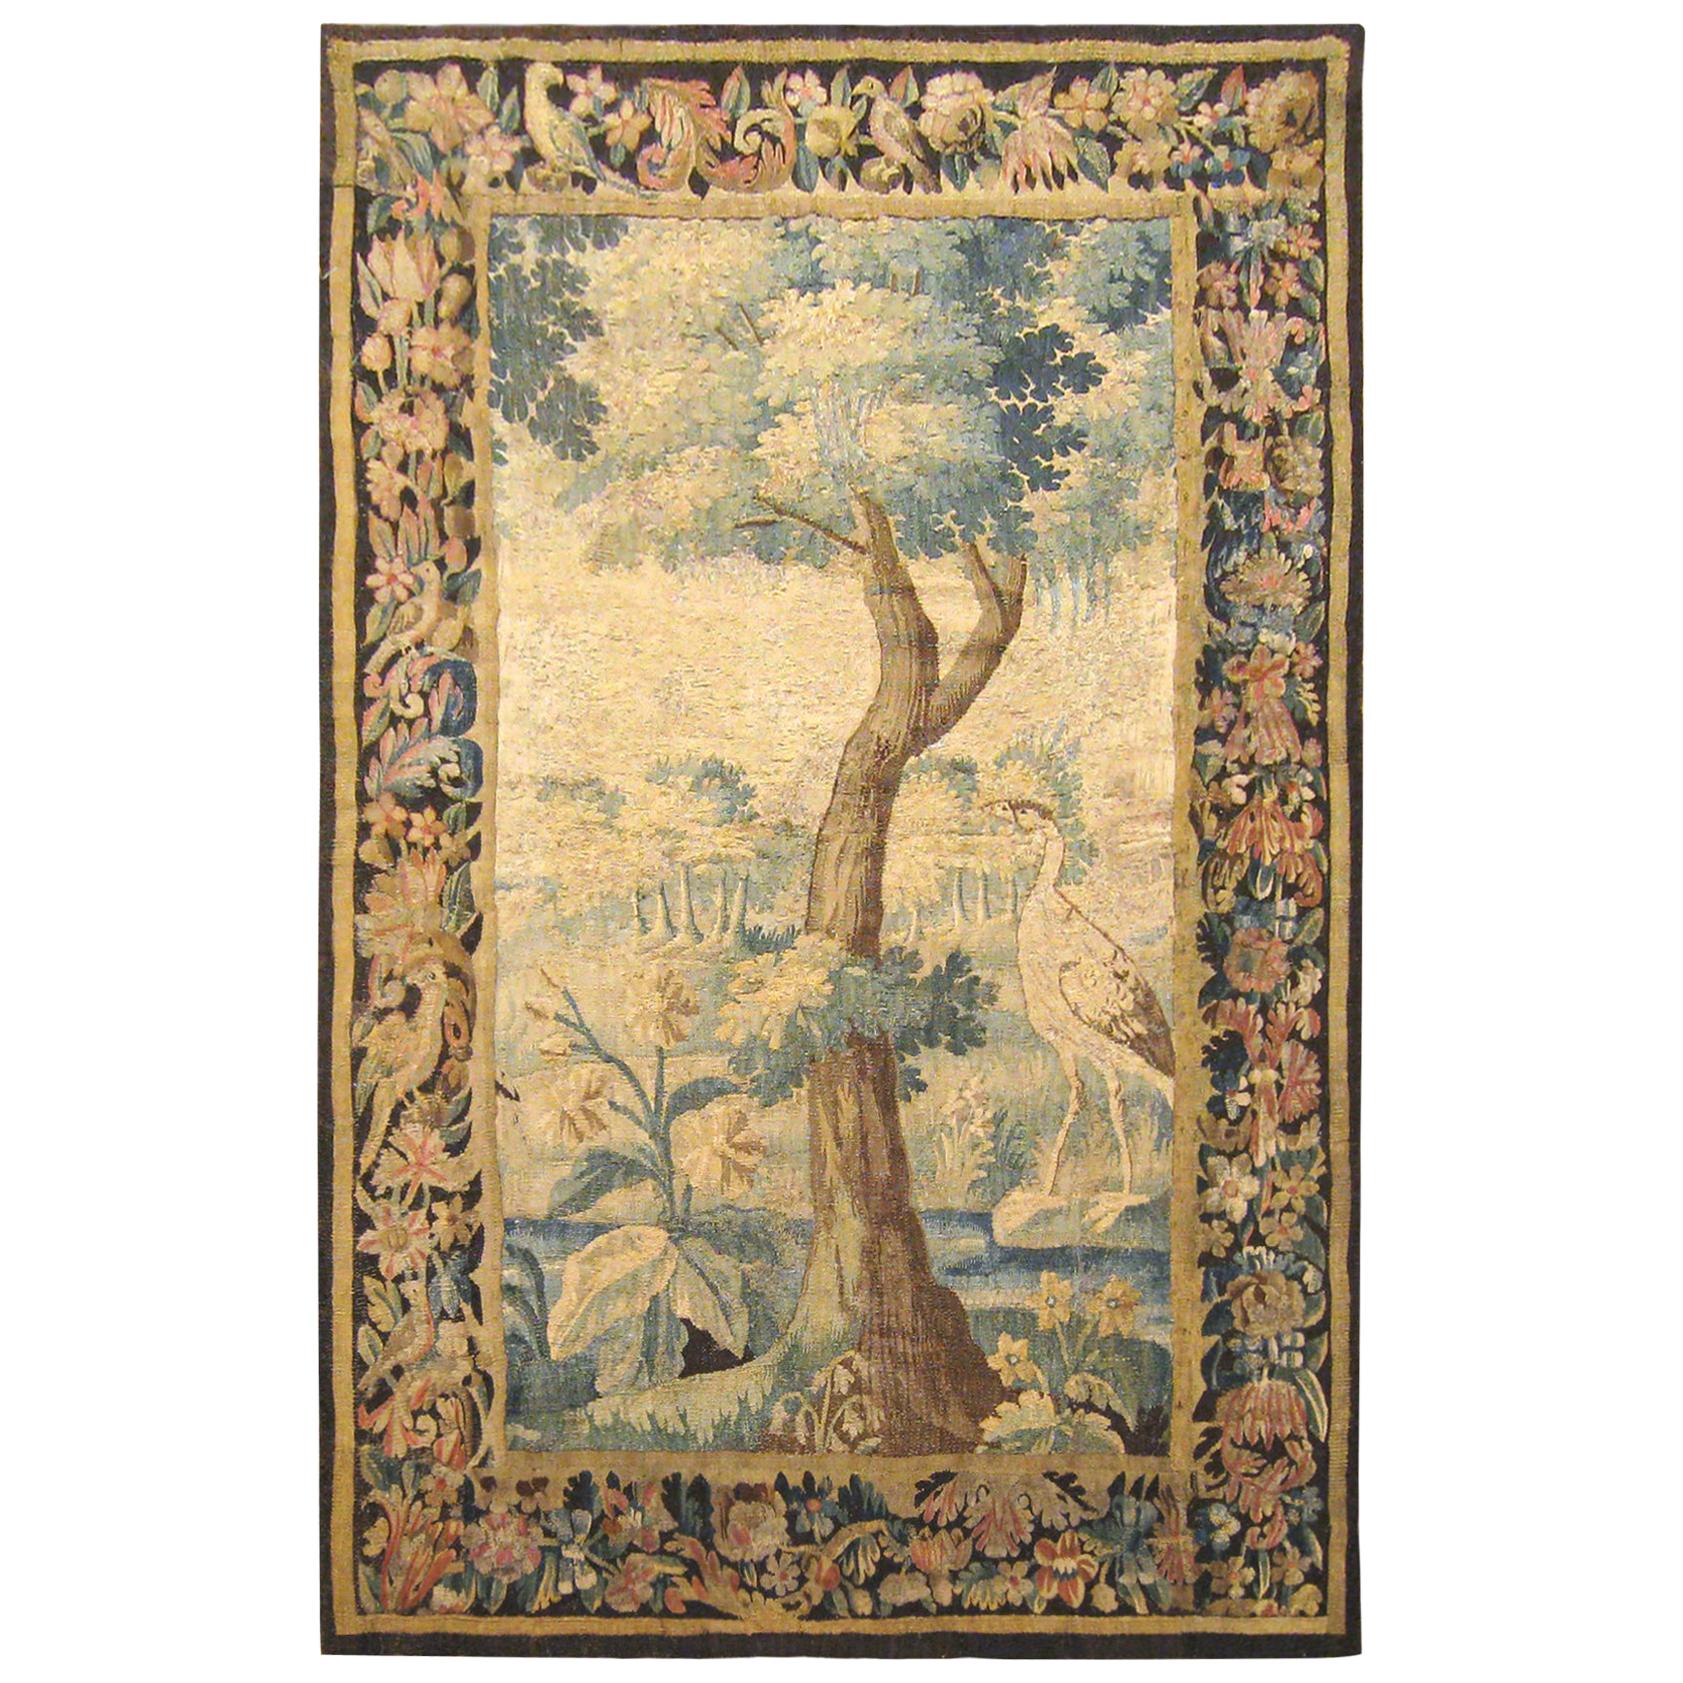 Flemish Verdure Landscape Tapestry Panel, with Large Tree and Foliate Border